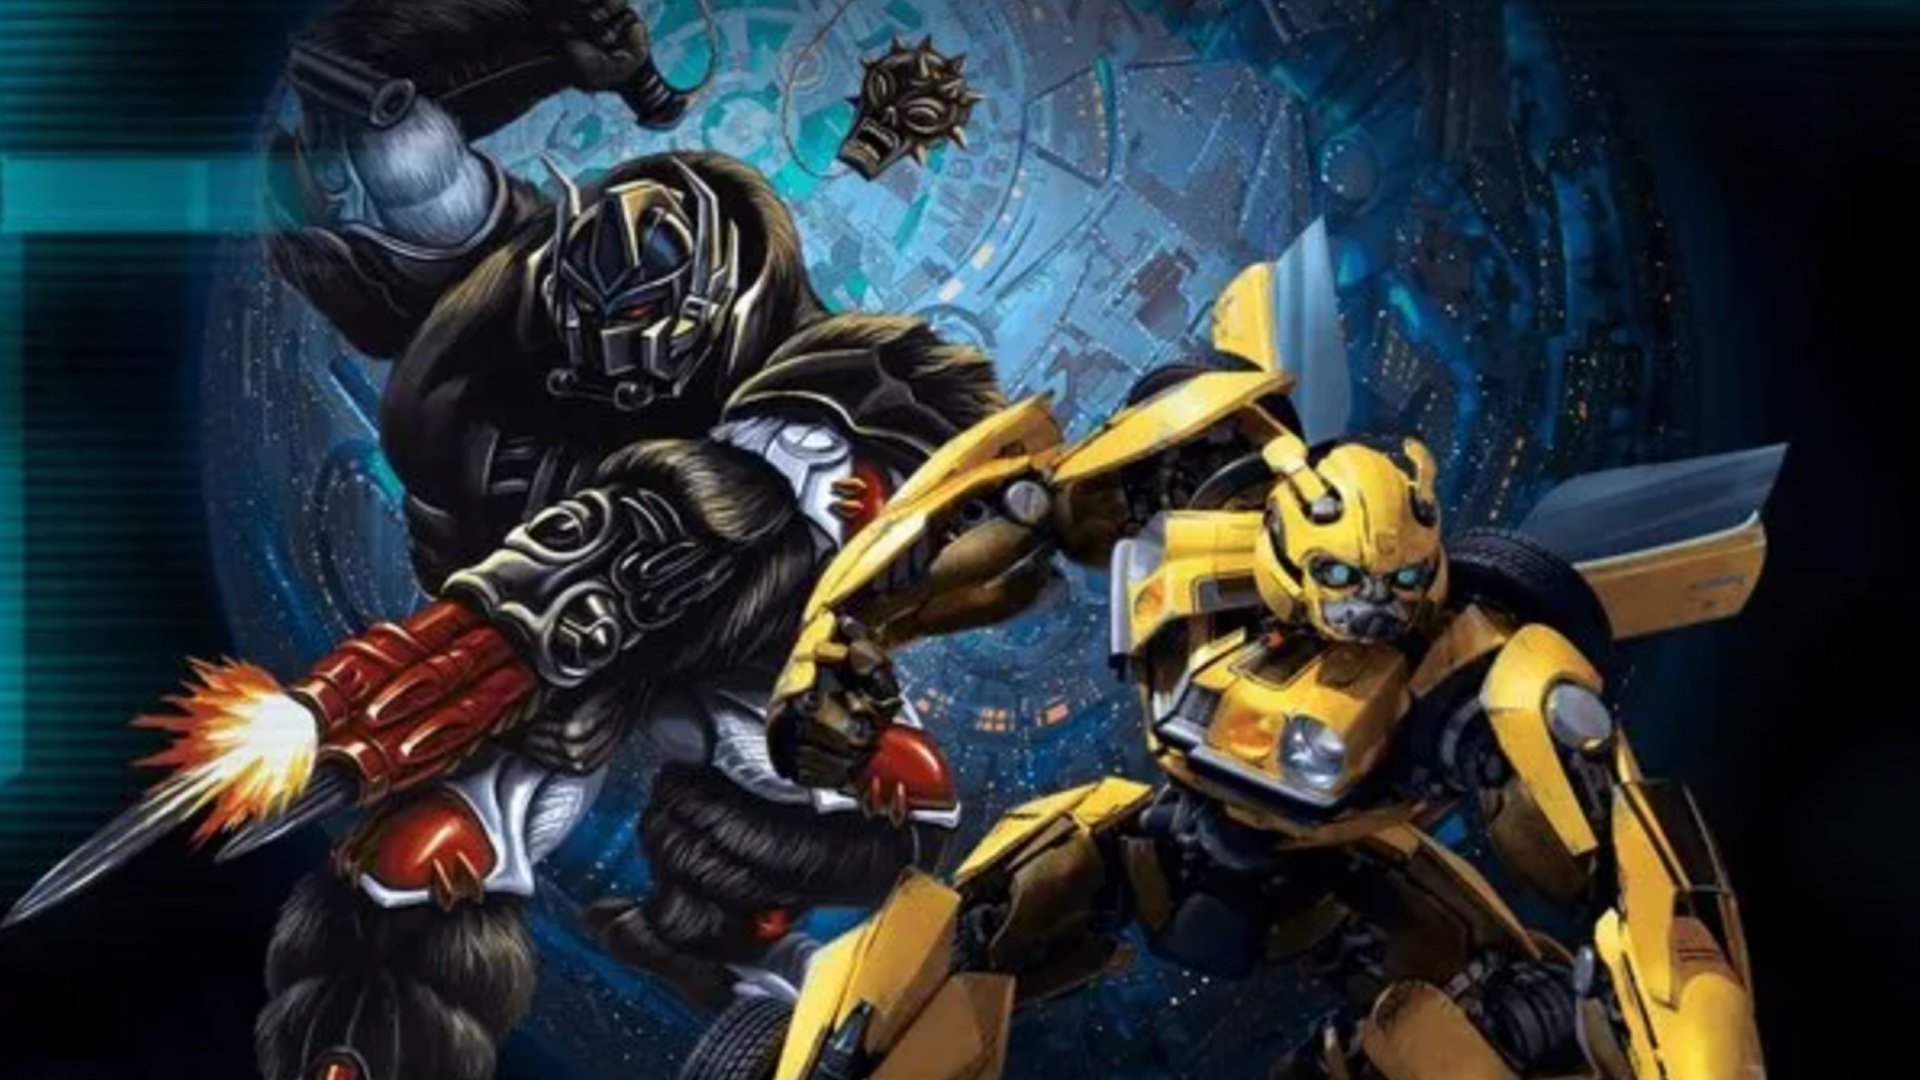 TRANSFORMERS: RISE OF THE BEASTS Promo Art Reveals First Look at Optimus Primal and Bumblebee